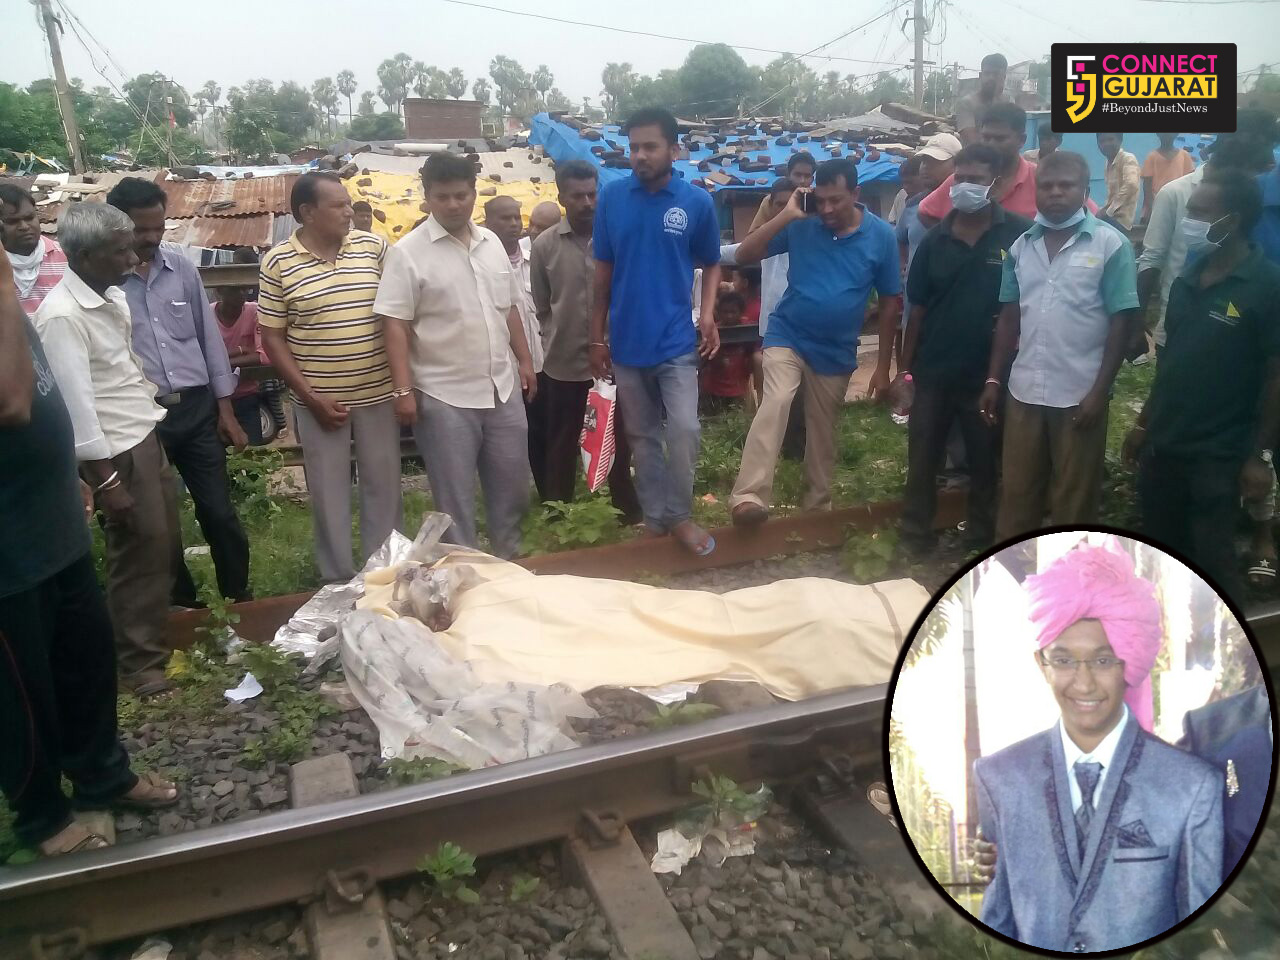 man died after came under the wheels of train